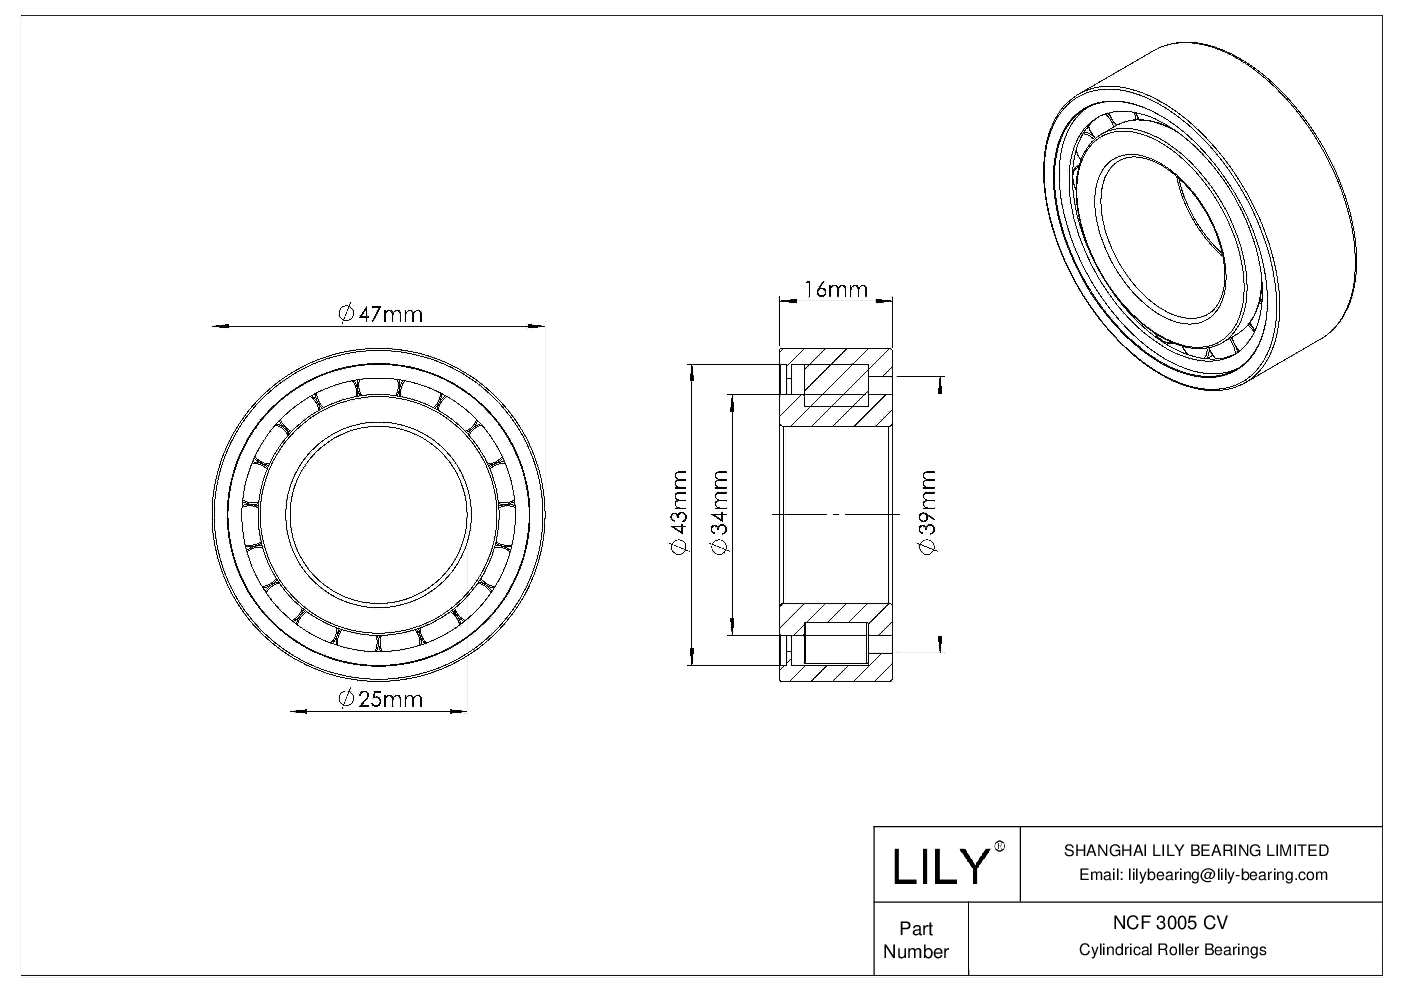 NCF 3005 CV Single Row Full Complement Cylindrical Roller Bearings cad drawing